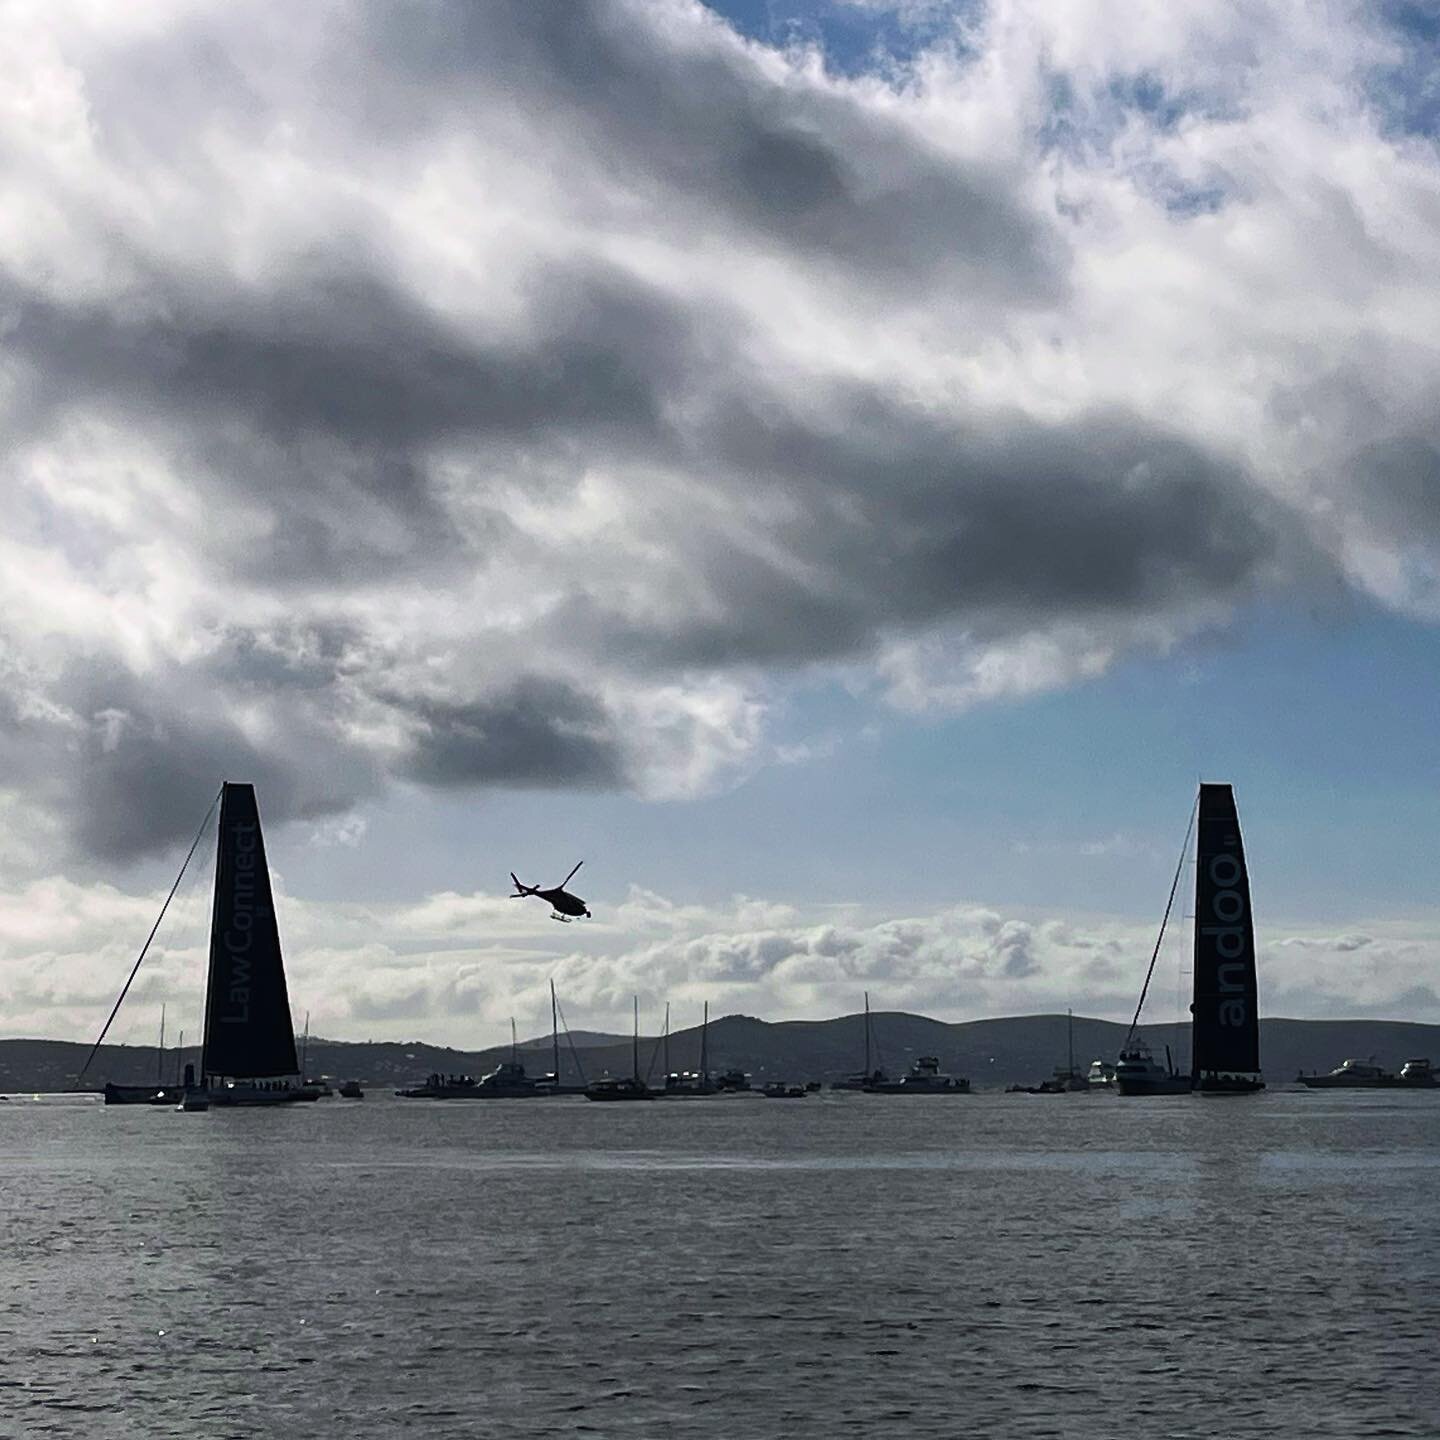 An epic finish to an epic @officialrolexsydneyhobart